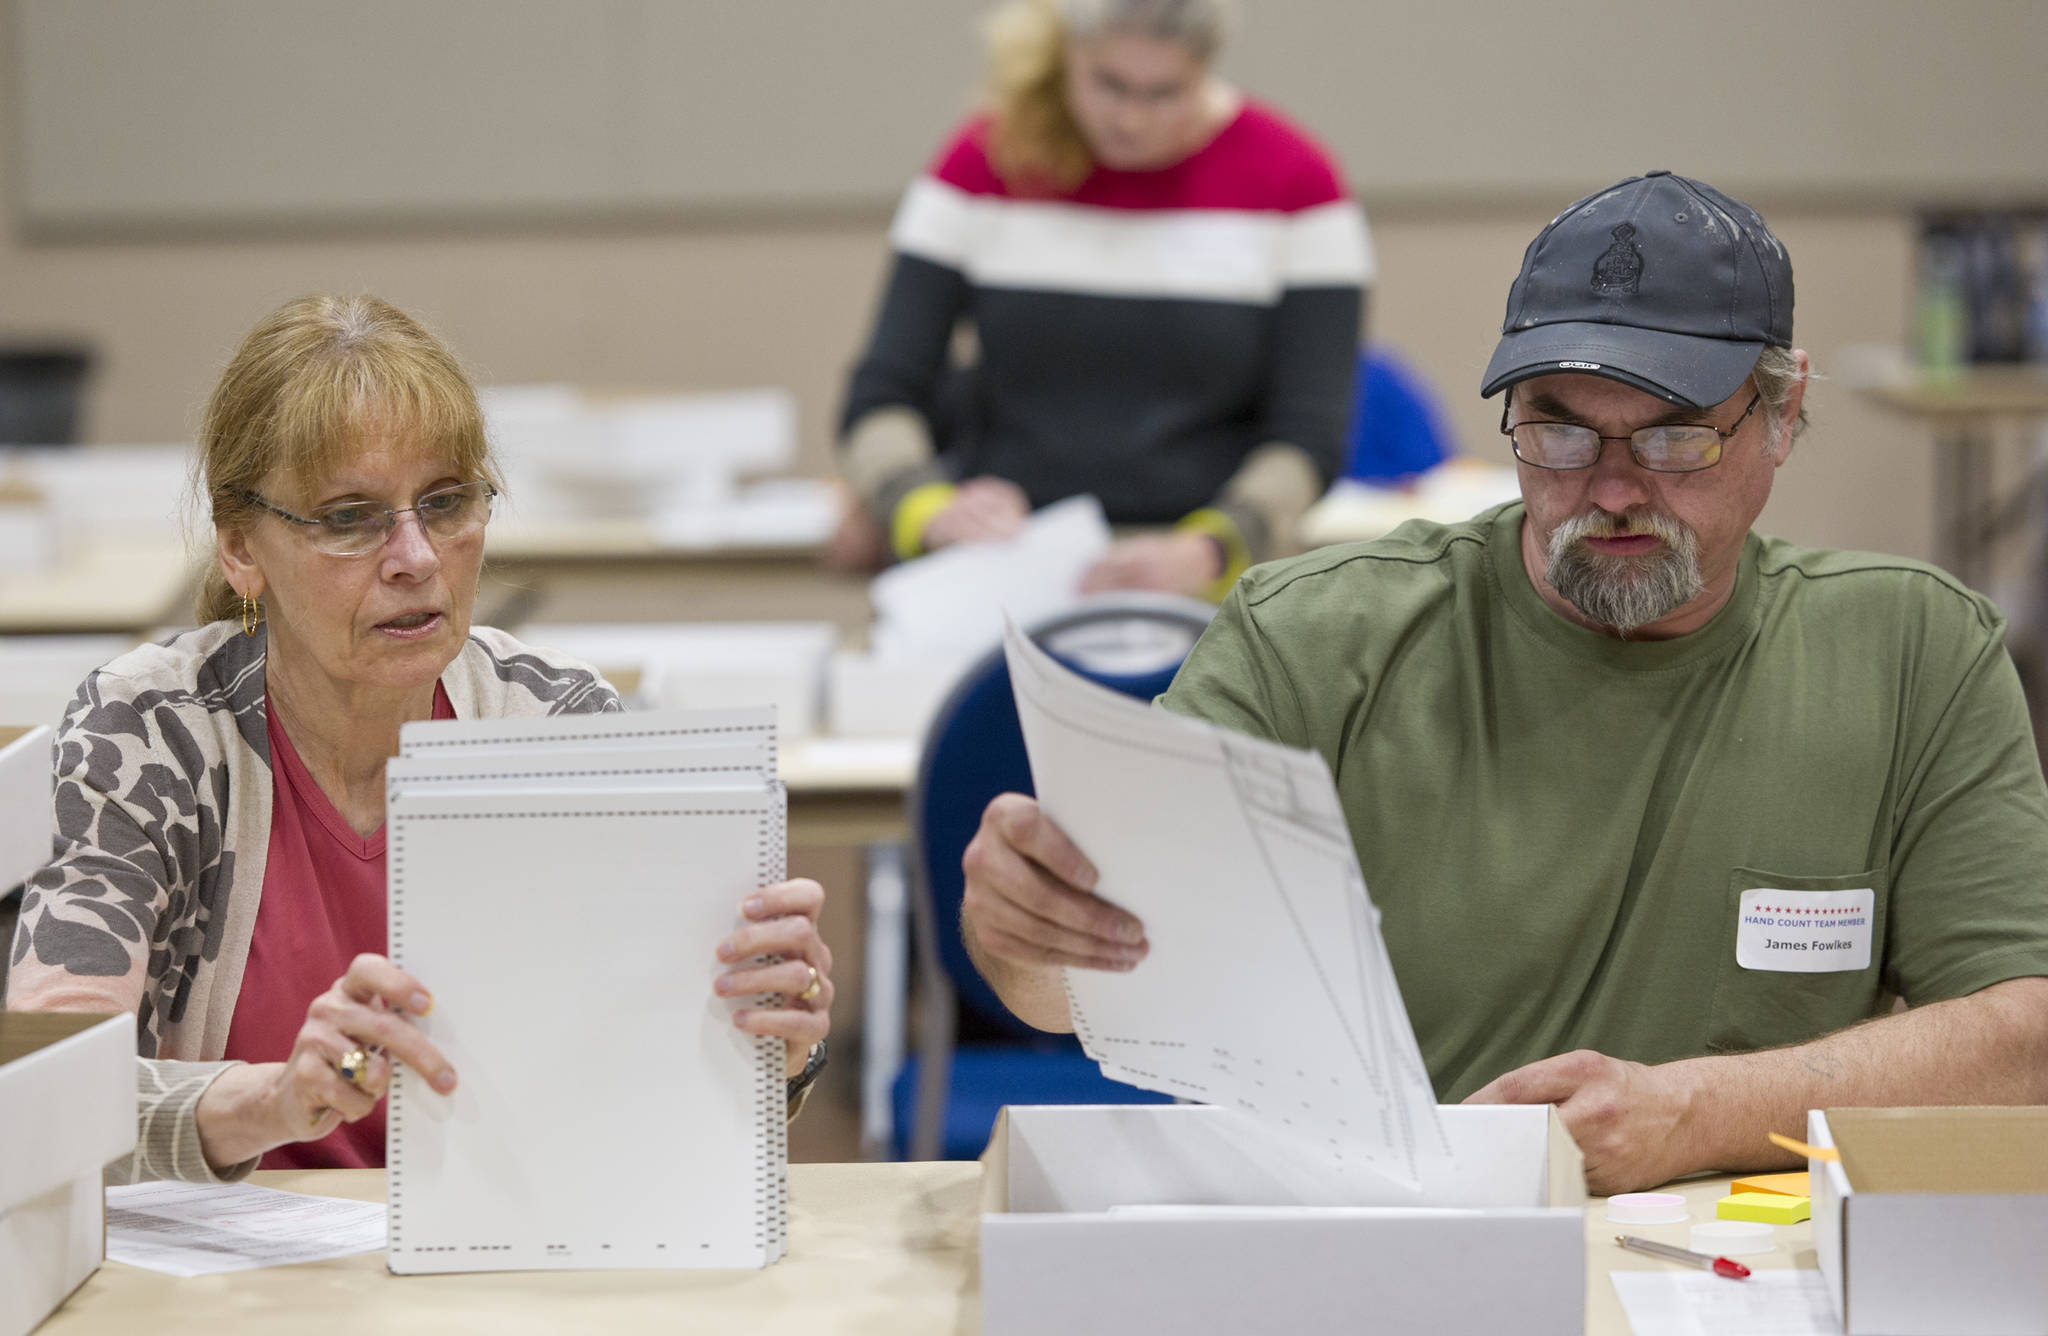 In this August 2016 photo, hand count team members Christine Niemi, left, and James Fowlkes count ballots at Centennial Hall from the state-wide primary election. (Michael Penn | Juneau Empire File)